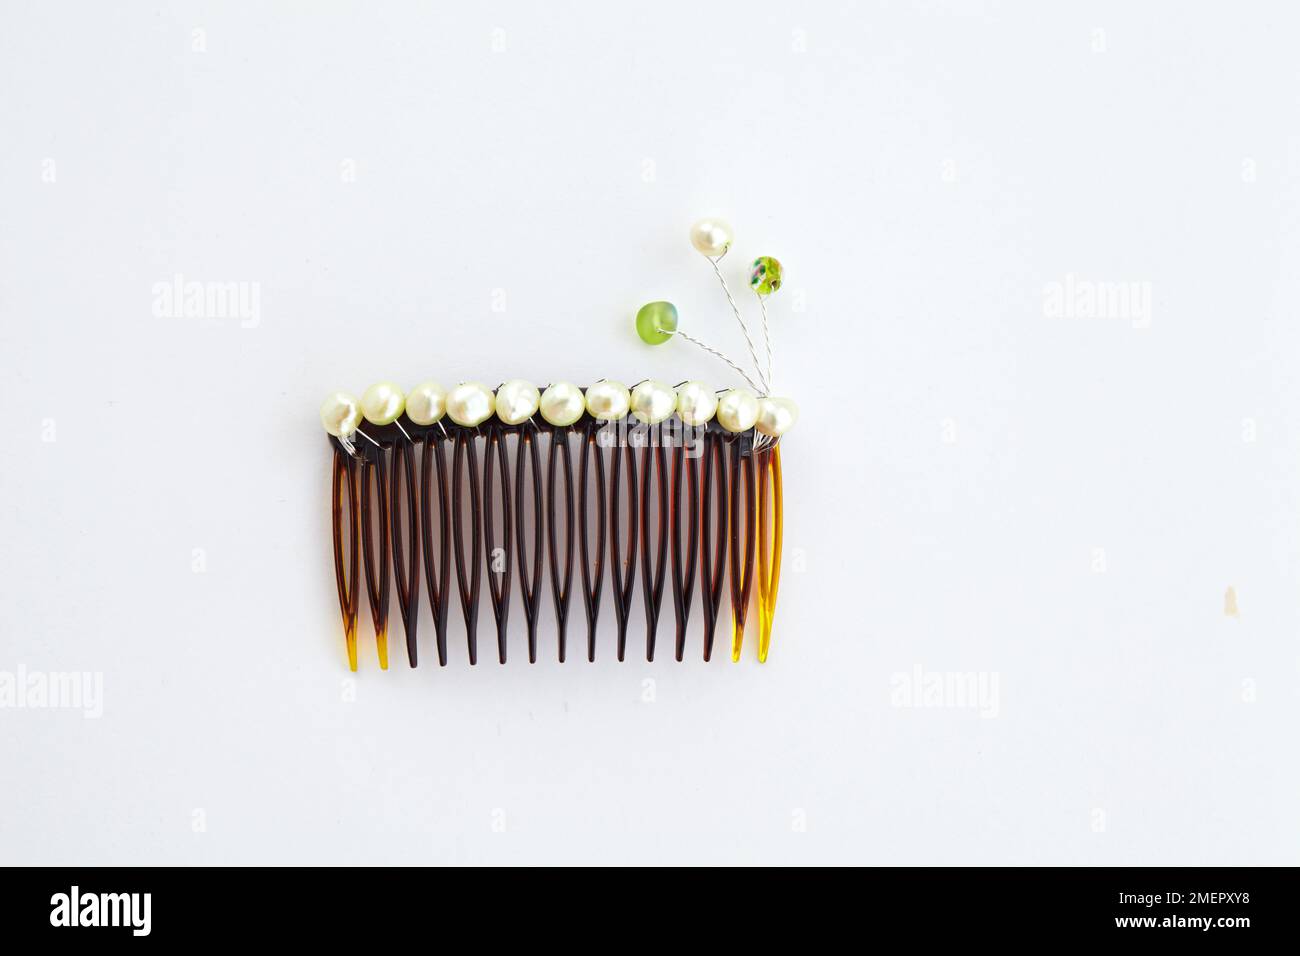 Hair comb decorated with twisted wires, overhead view Stock Photo